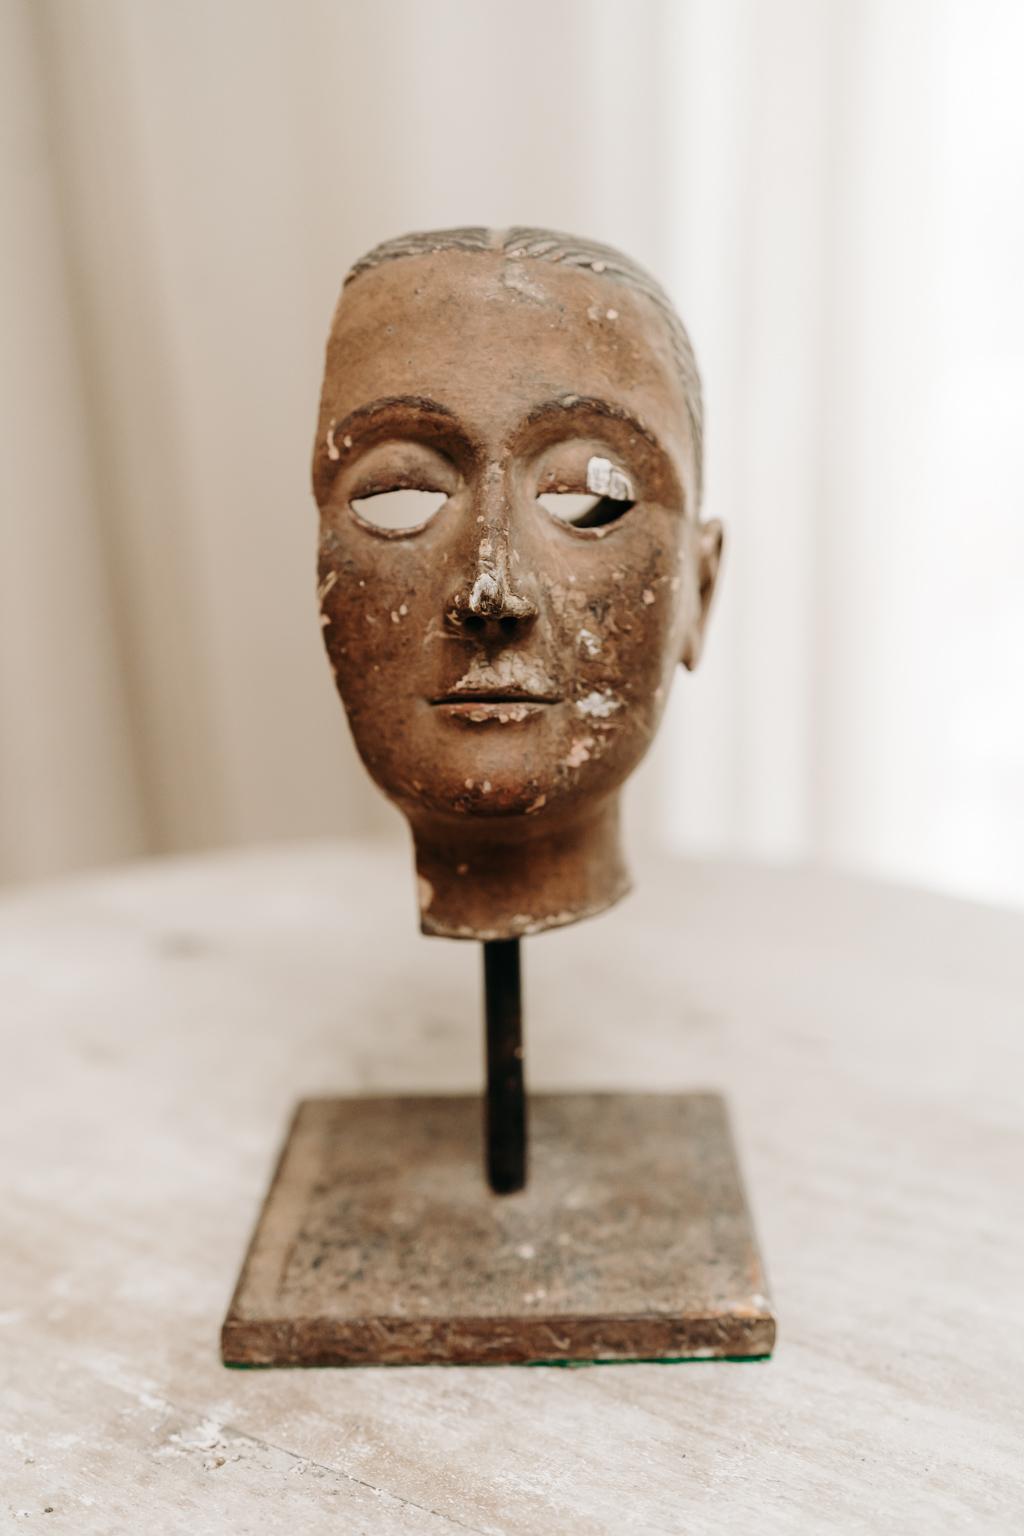 a polychromed wooden Santos head, found in Spain, mid 18th century,
height is 16 cm with foot 24 cm, width 9 cm with foot 12 cm, depth 7 cm with foot 12 cm. 